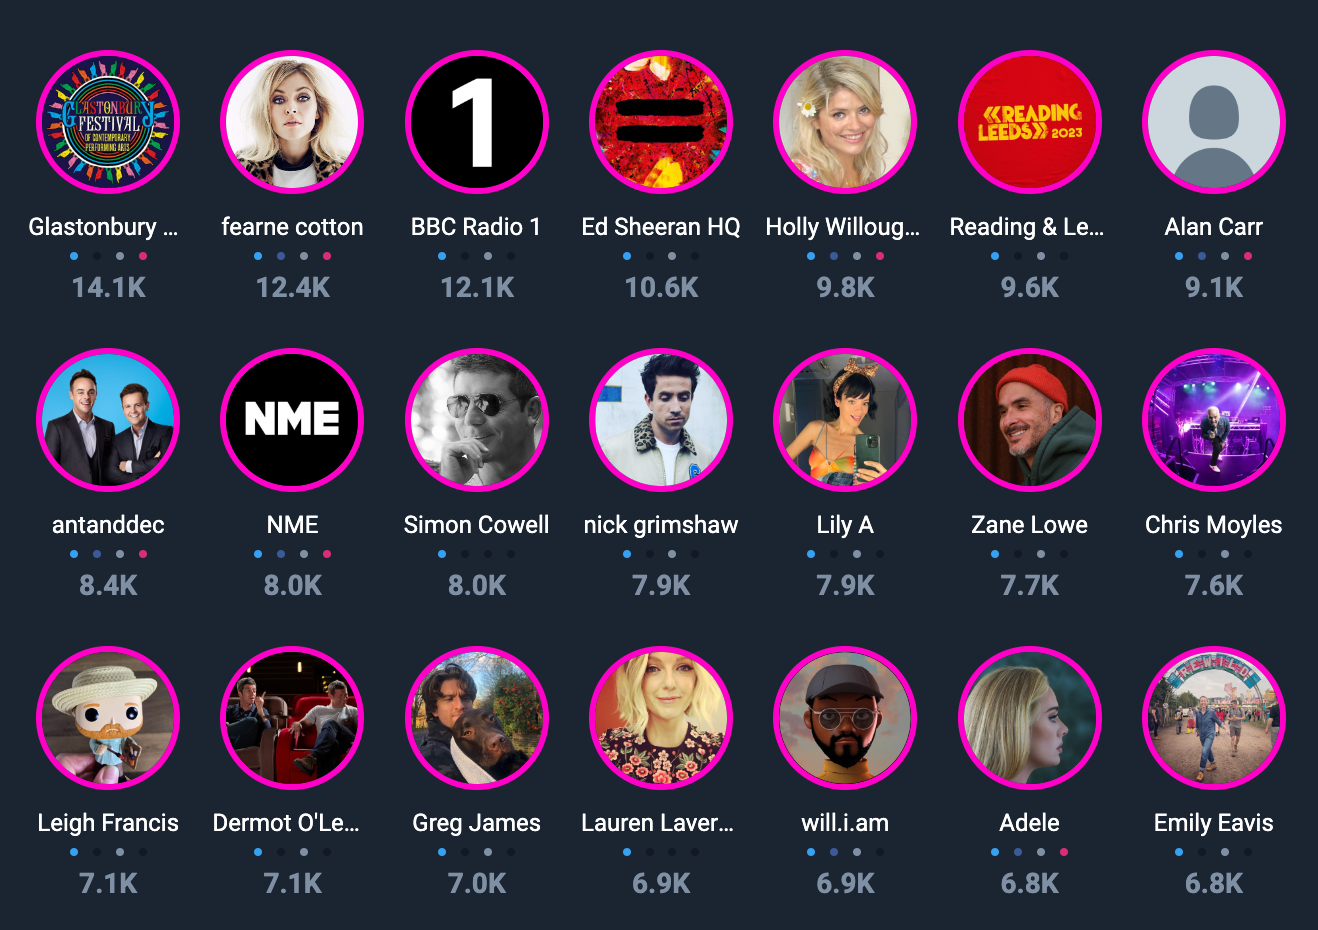 Top influencers for Rock & Pop Music audience